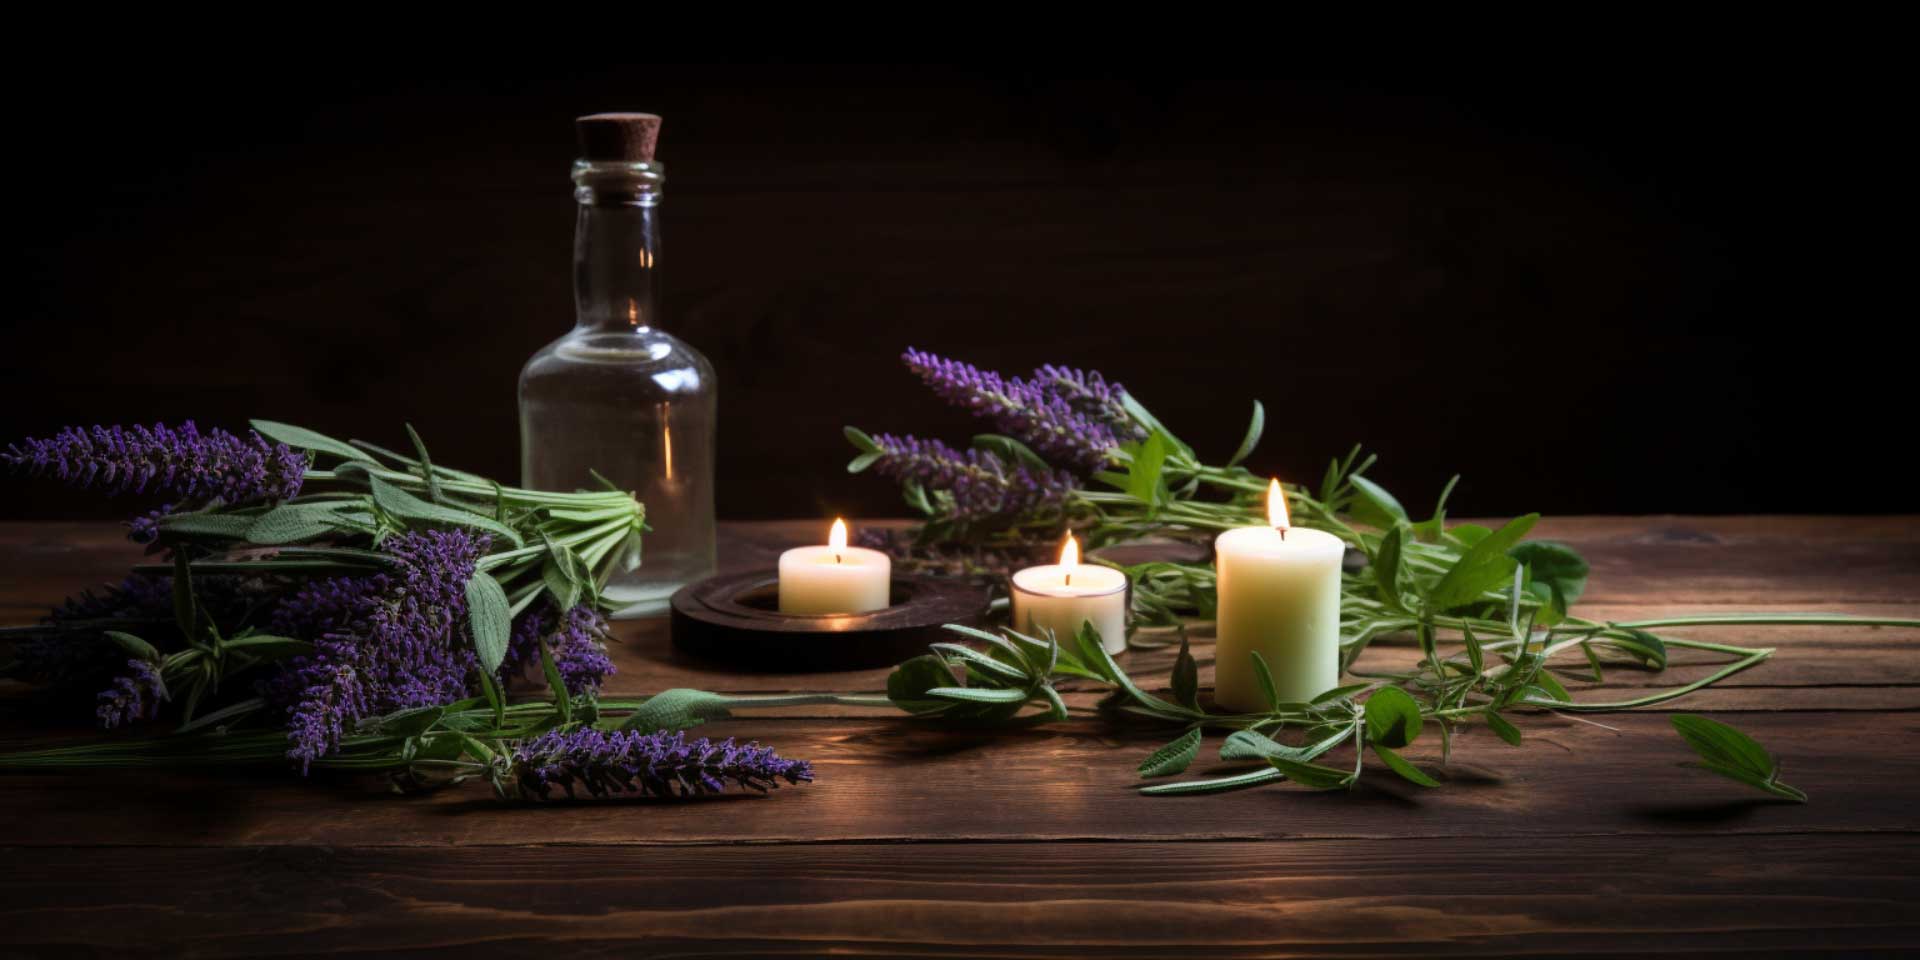 A bunch of purple flowering plants on a wooden table with three candles and one glass jar